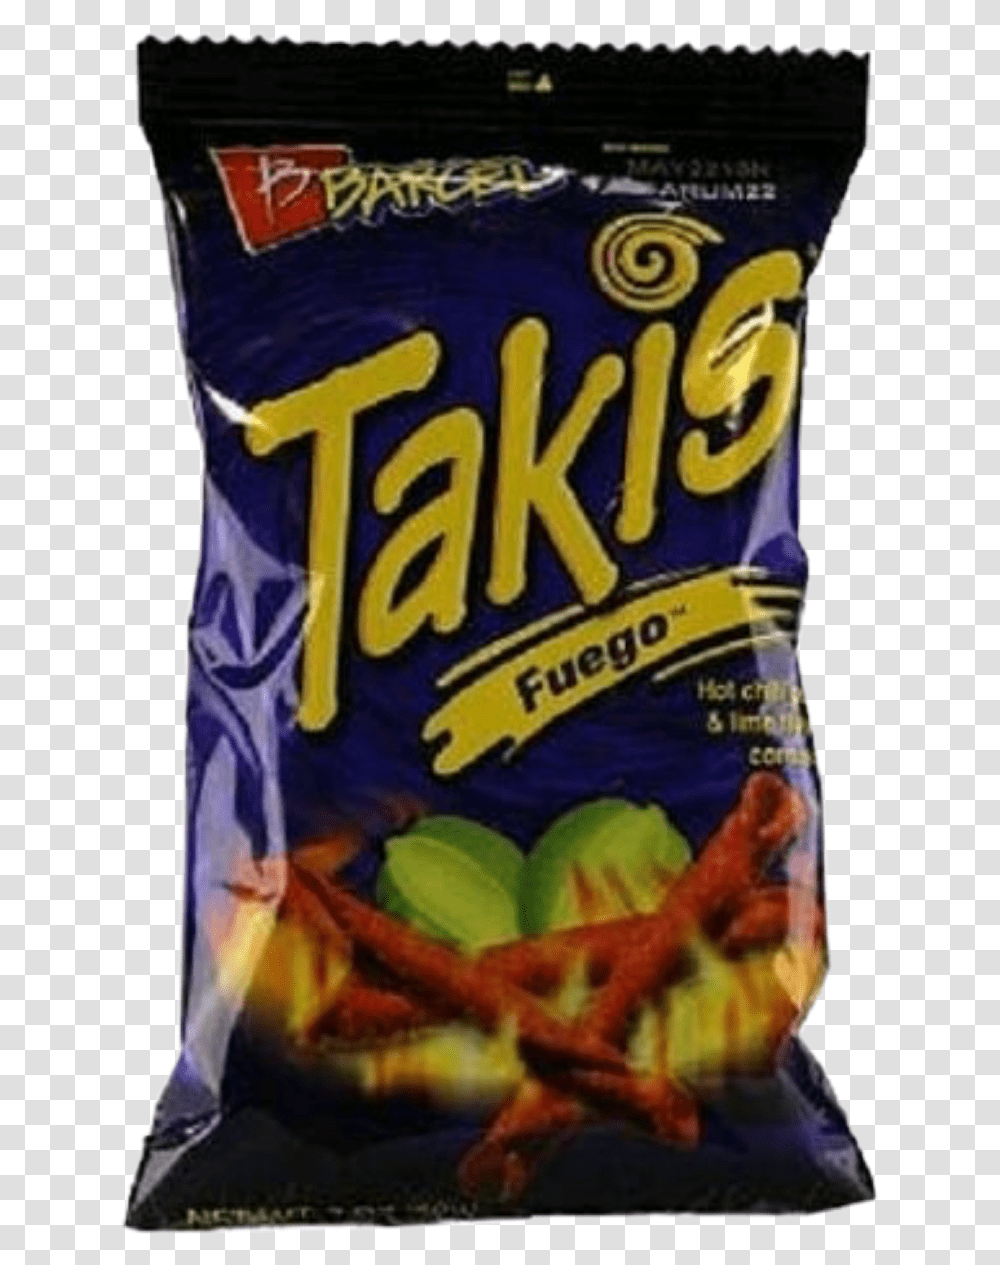 Takis Fuego Chips Snack Food Interesting Art Takis Fuego, Canned Goods, Aluminium, Sweets Transparent Png